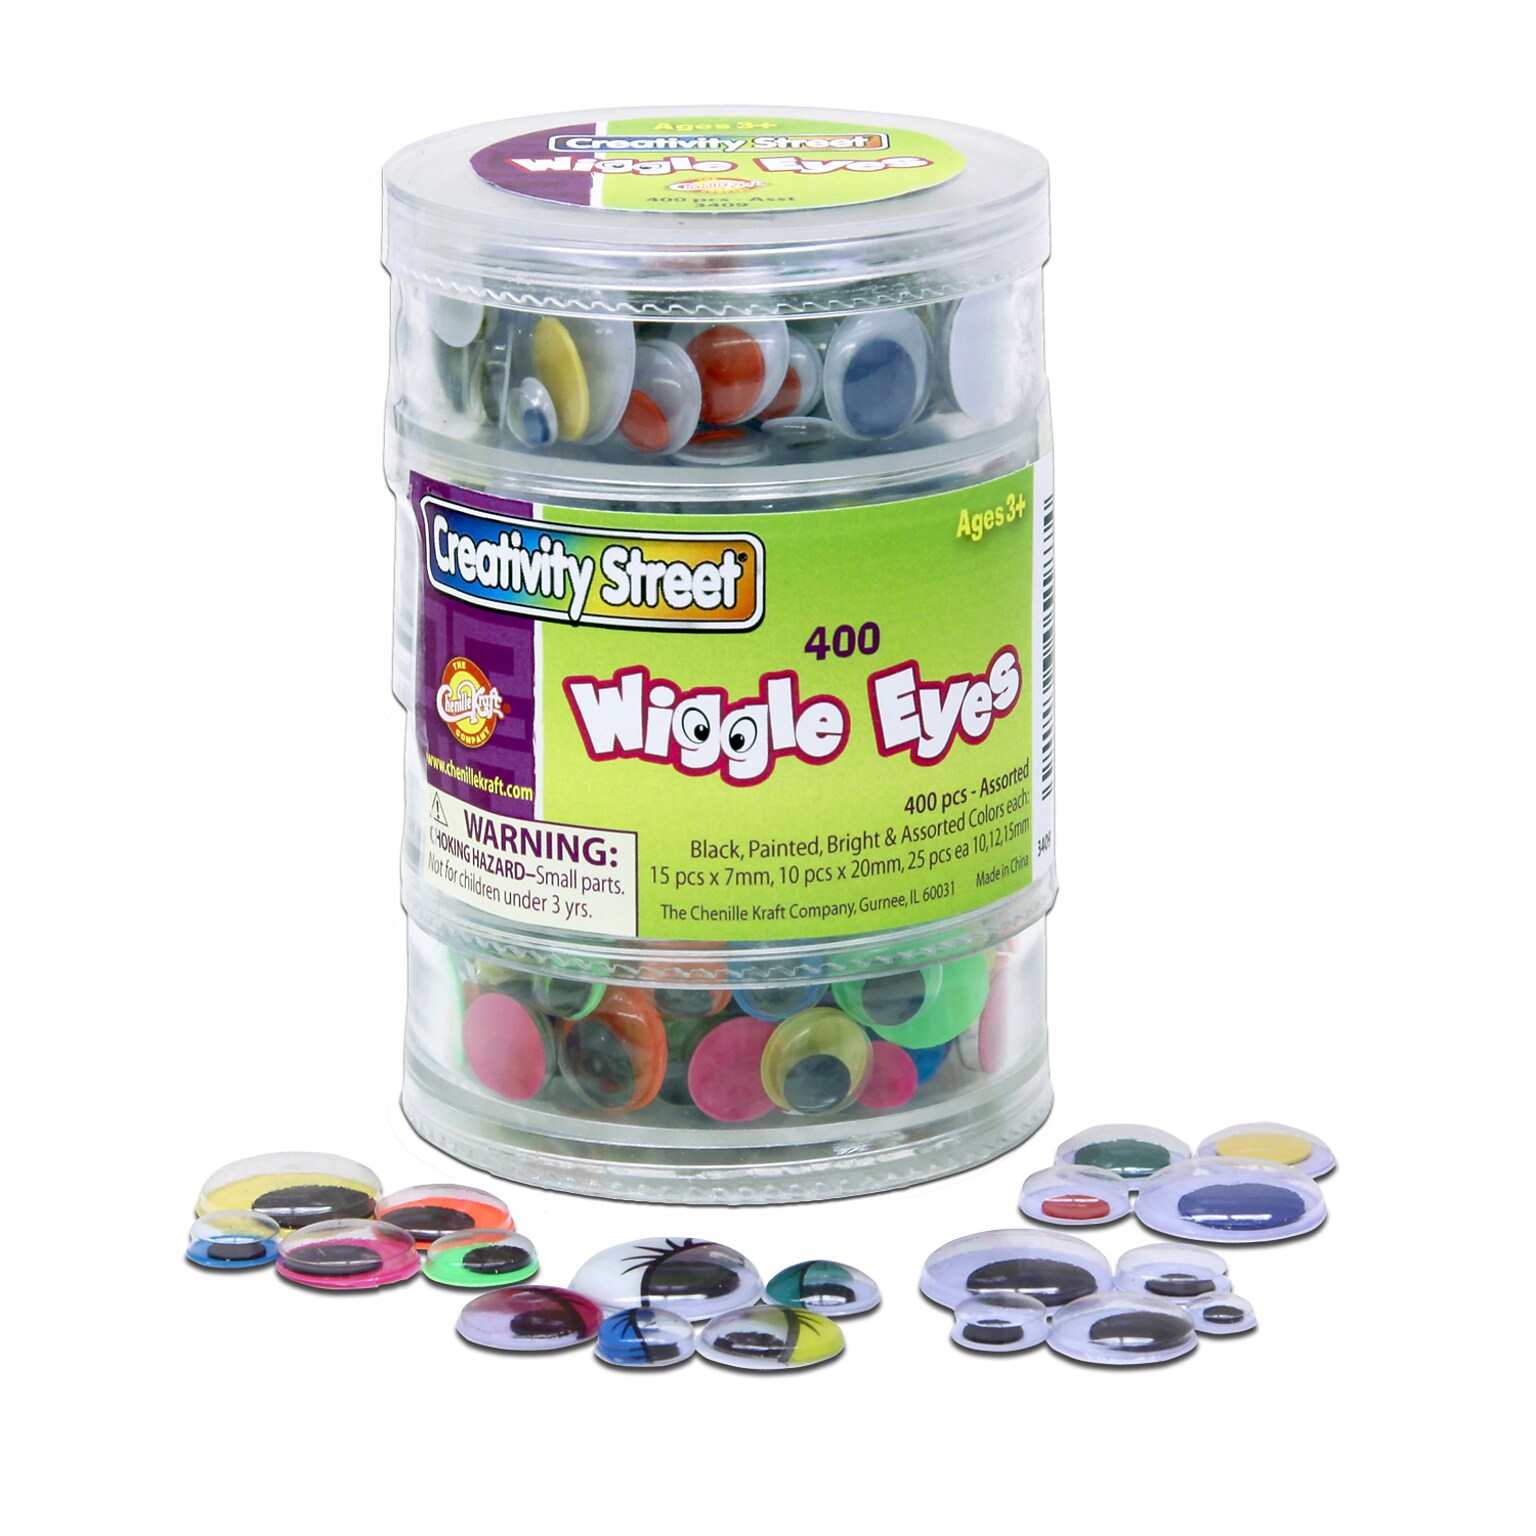 Chenille Kraft Stacking Jar Wiggle Eyes; 400 Piece(s), 0.28, 0.39, 0.47, 0.59, 0.79, Assorted